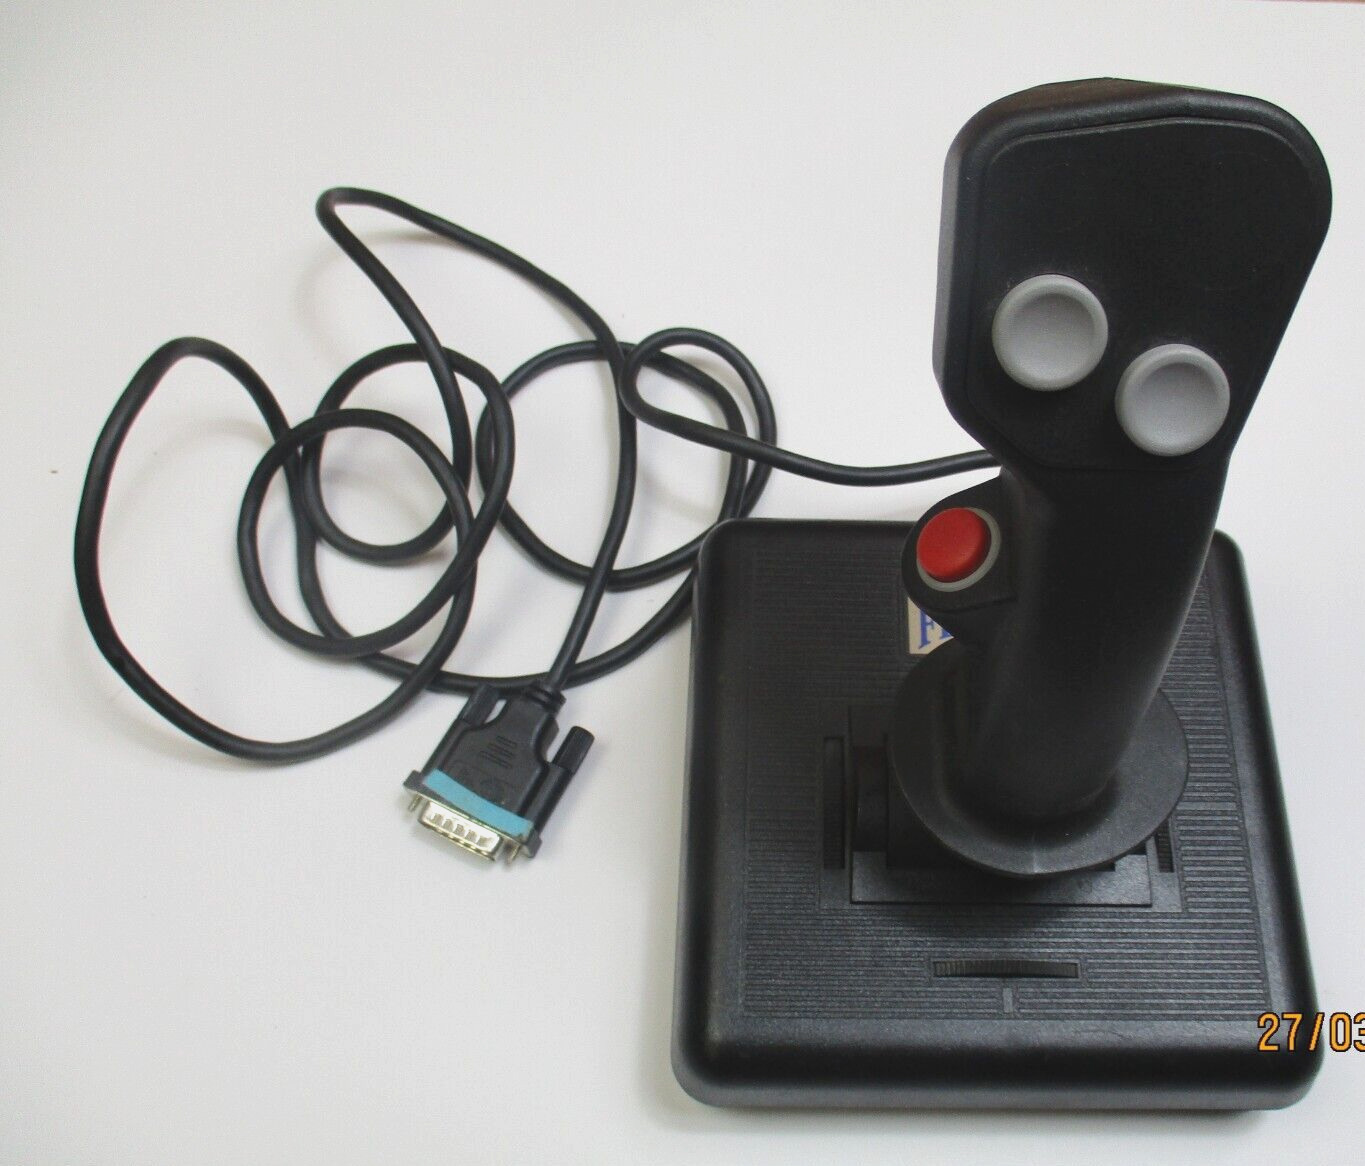 F16 CH Products Flight Stick Joystick for PC Gaming - 15 PIN Game Port     #6979